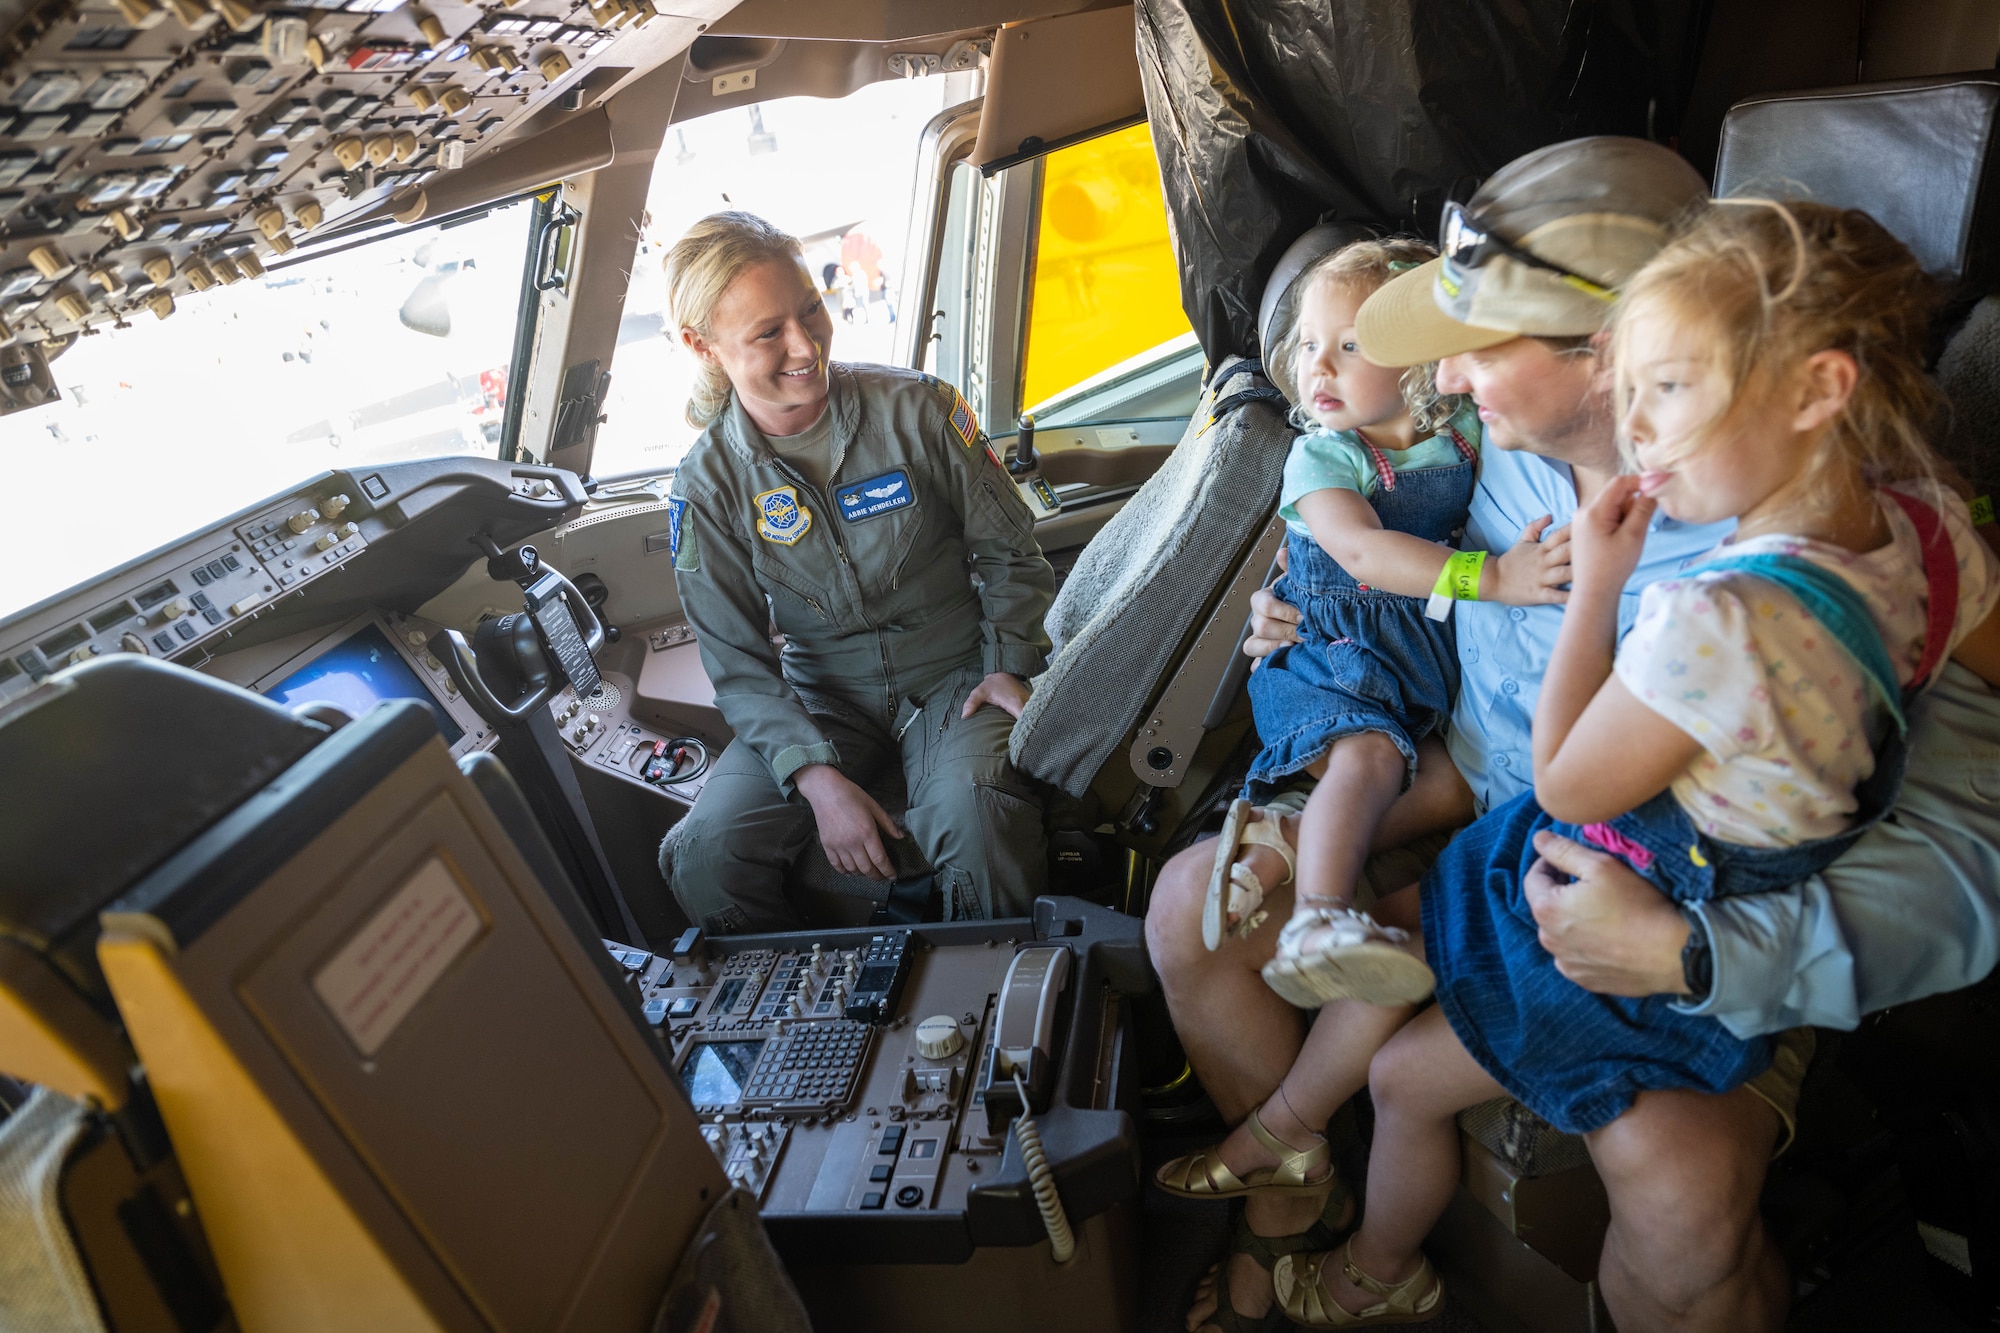 Two little girls learn about the KC-46 Pegasus, an air refueling aircraft, during the Frontiers in Flight Air show at McConnell Air Force Base, Kansas, Sept. 25, 2022. The air show featured 12 performers including Tora Tora Tora, an A-10 demonstration, and the U.S. Air Force Thunderbirds to name a few. An air show, also known as an open house, is a way for military members and installations to show appreciation to local communities as well as showcase Department of Defense and Air Force capabilities. Wichita, home to McConnell AFB, is known as the Air Capital of the World, the birthplace of some very famous airframes. (U.S. Air Force photo by Master Sgt. John Gordinier)